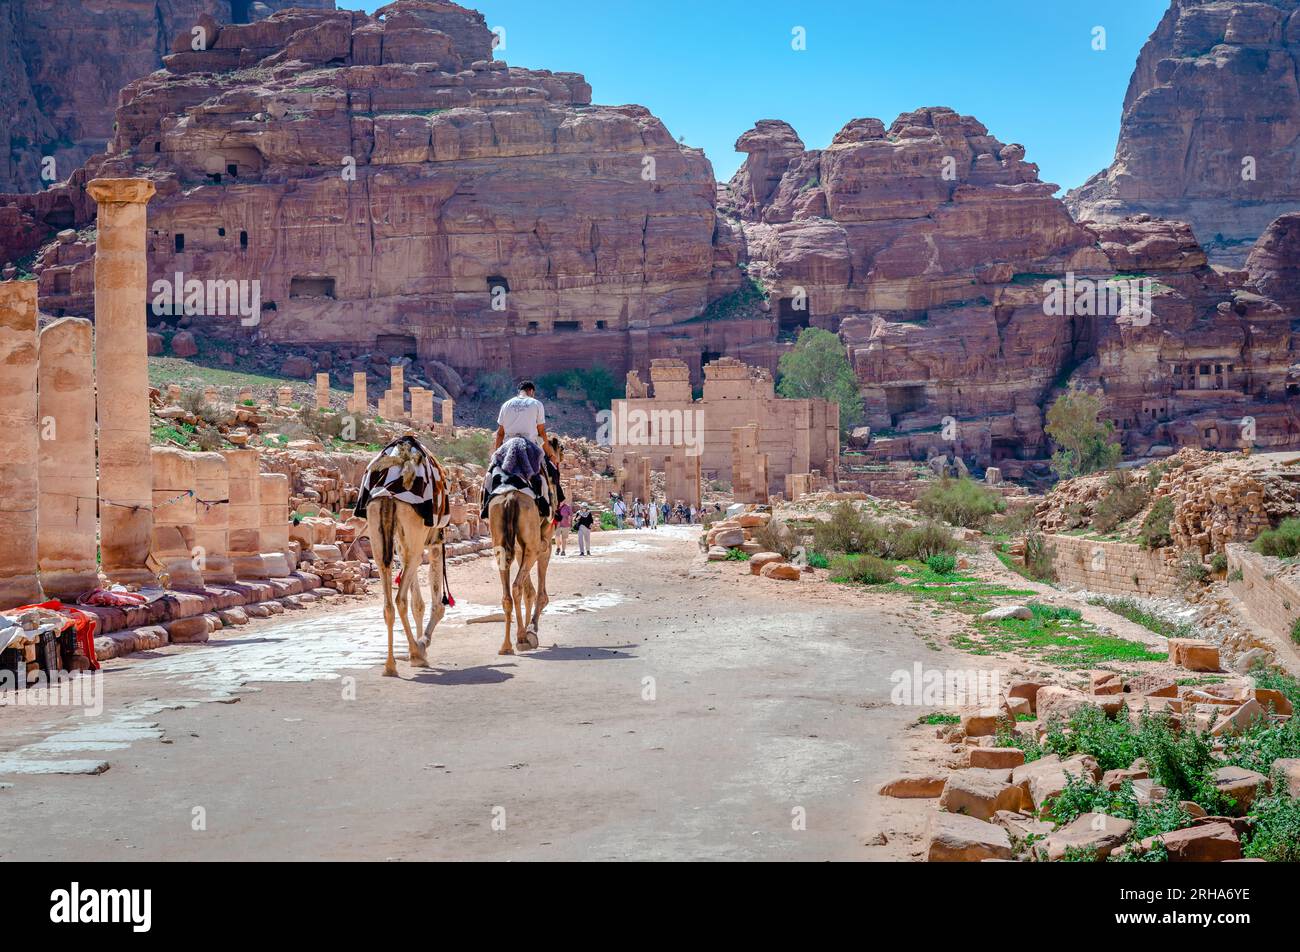 The Colonnade Street that runs through the ancient city of Petra with the temple of Qasr al-Bint (Dushares) up front. Stock Photo